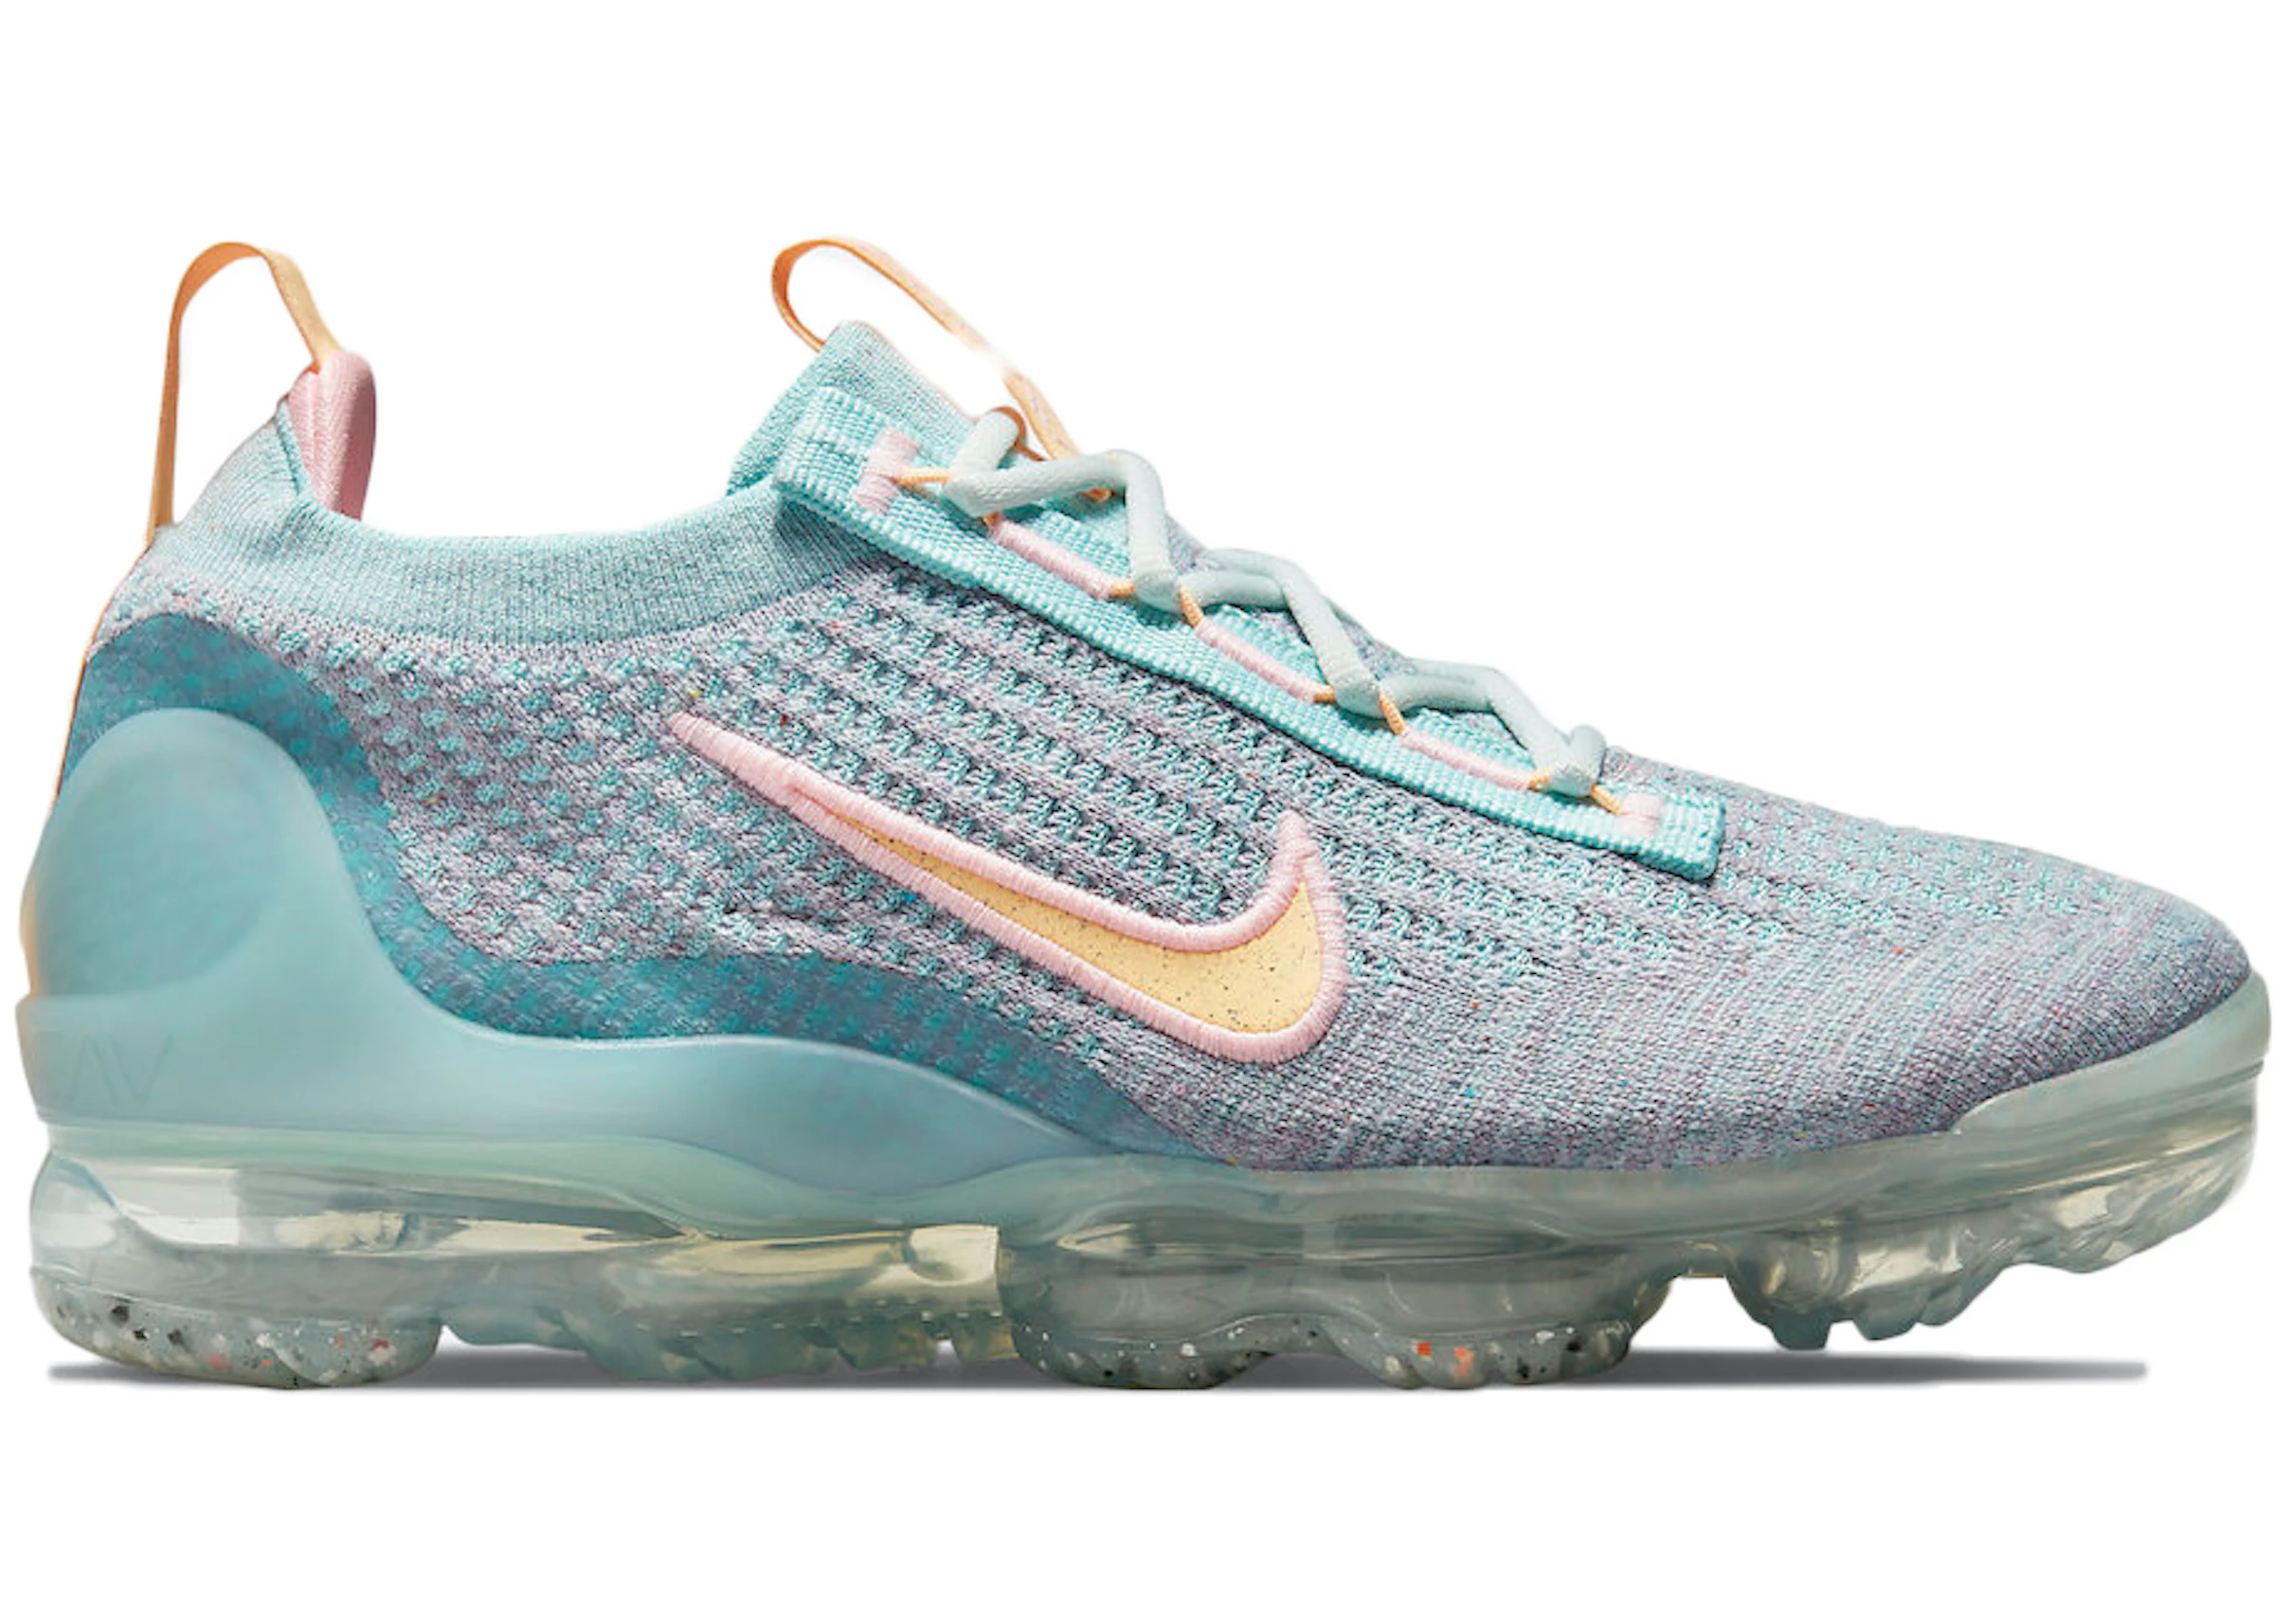 Catena Realm Acquisition Nike Air VaporMax 2021 FK Light Dew (W) - DH4088-300 - US